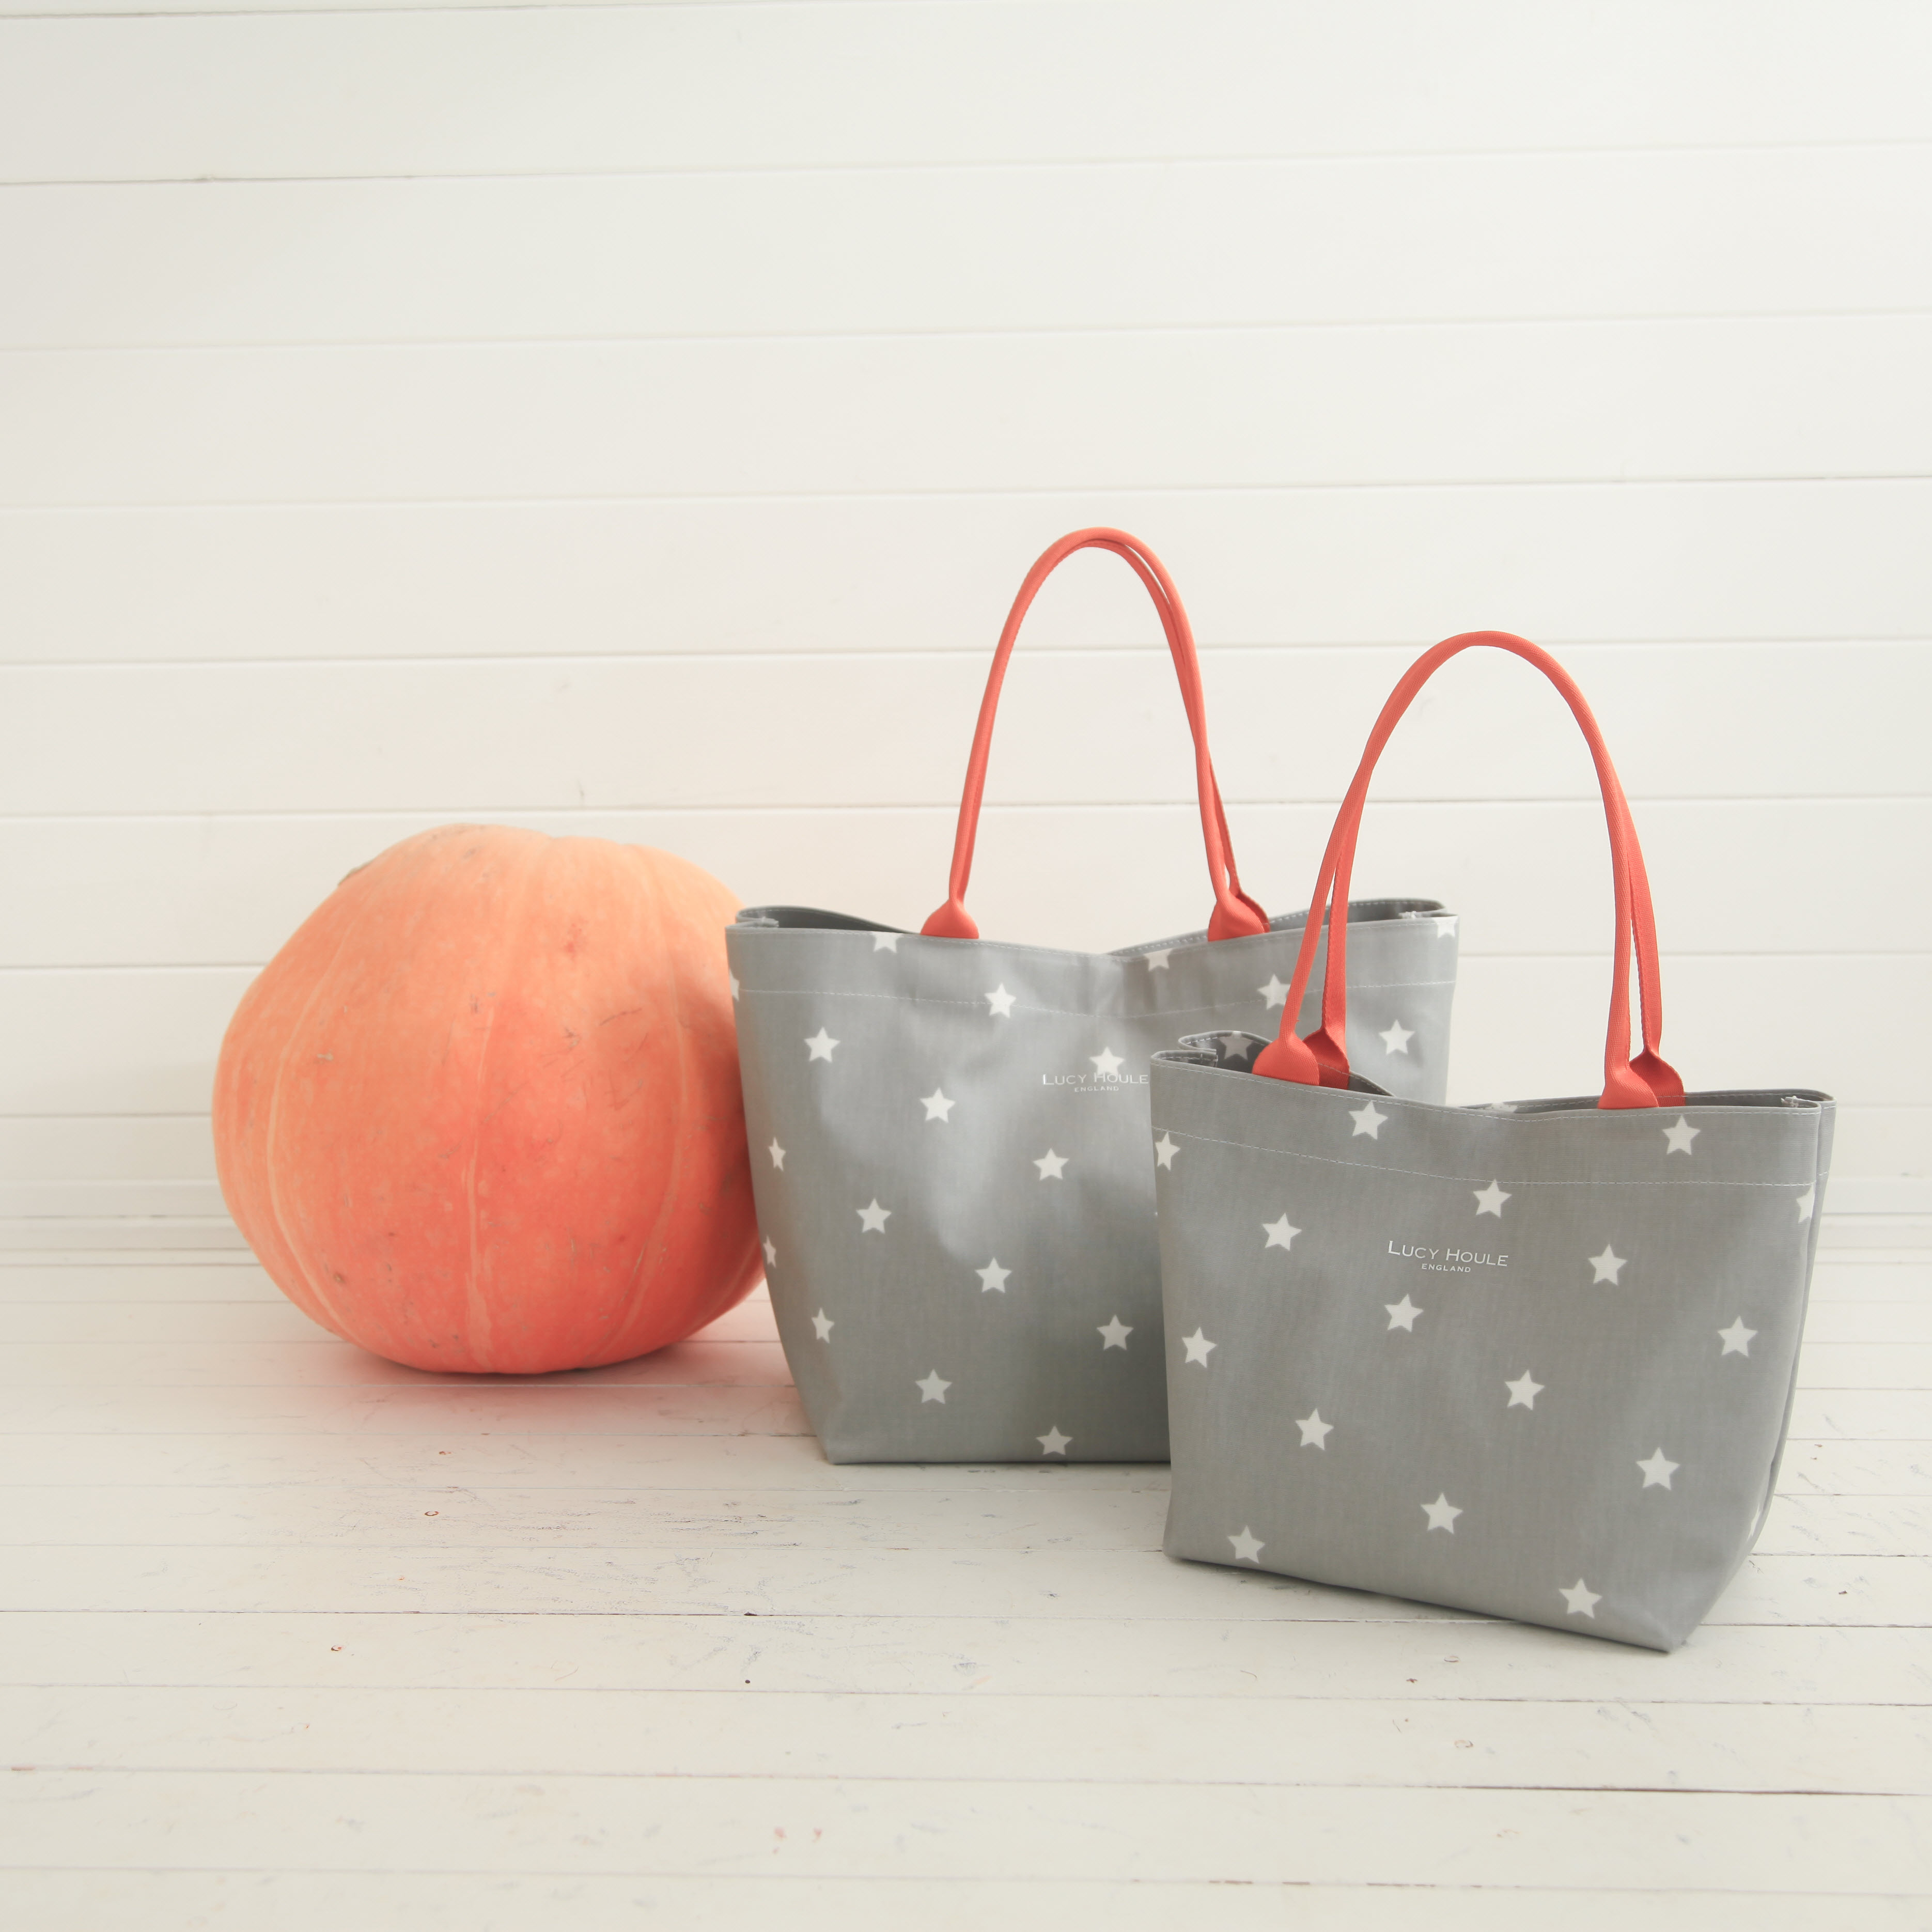 Grey & White Star Small Tote Bag with Orange Handles